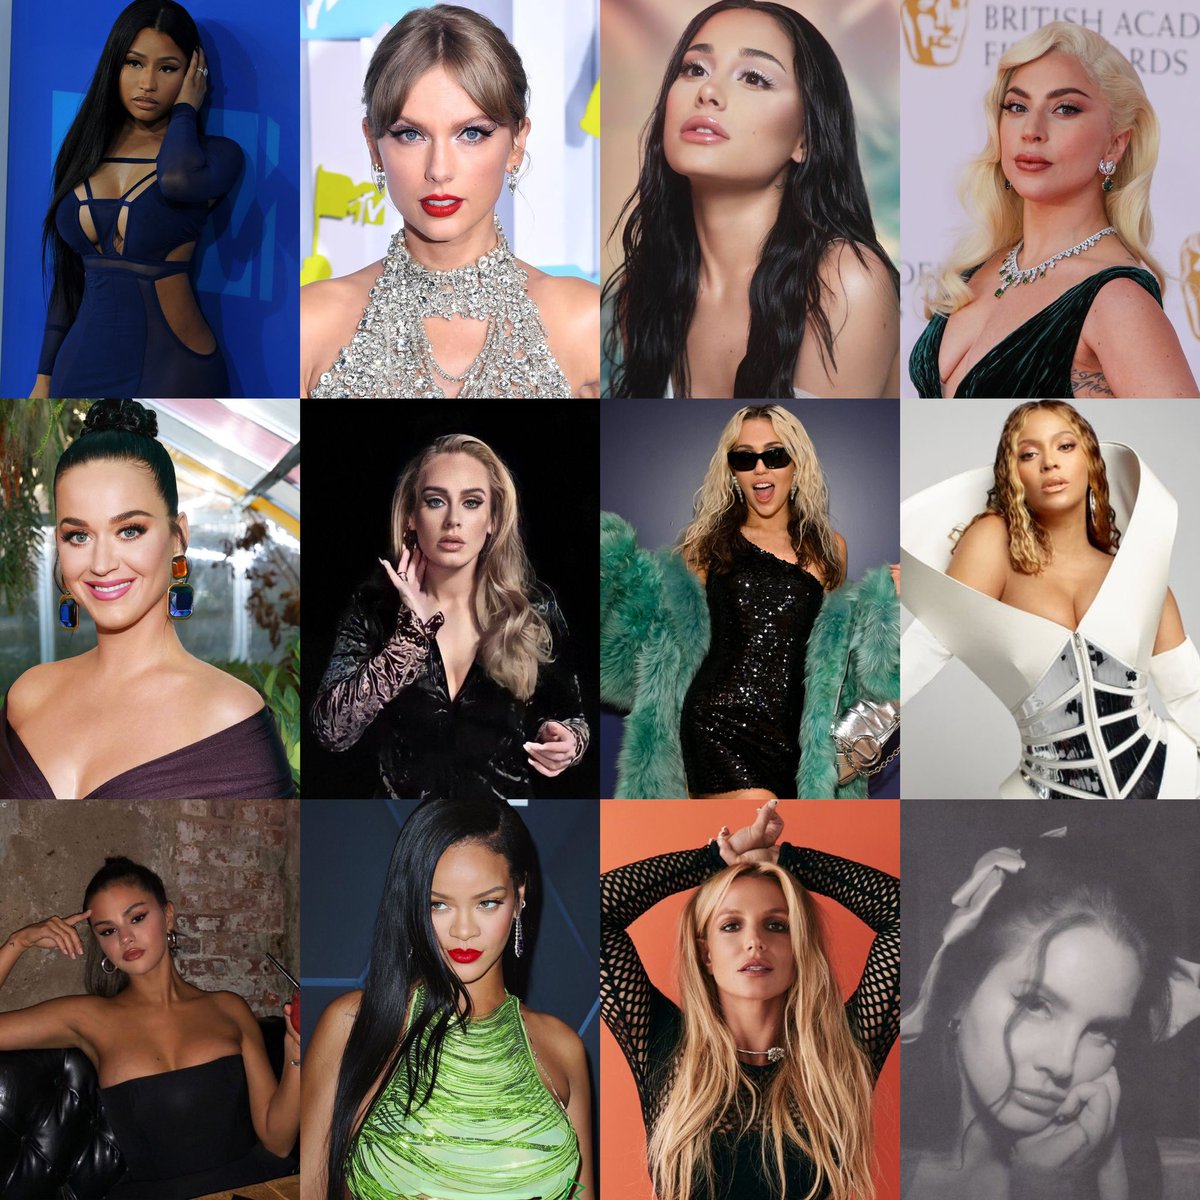 name your favorite song by each of these female artists.